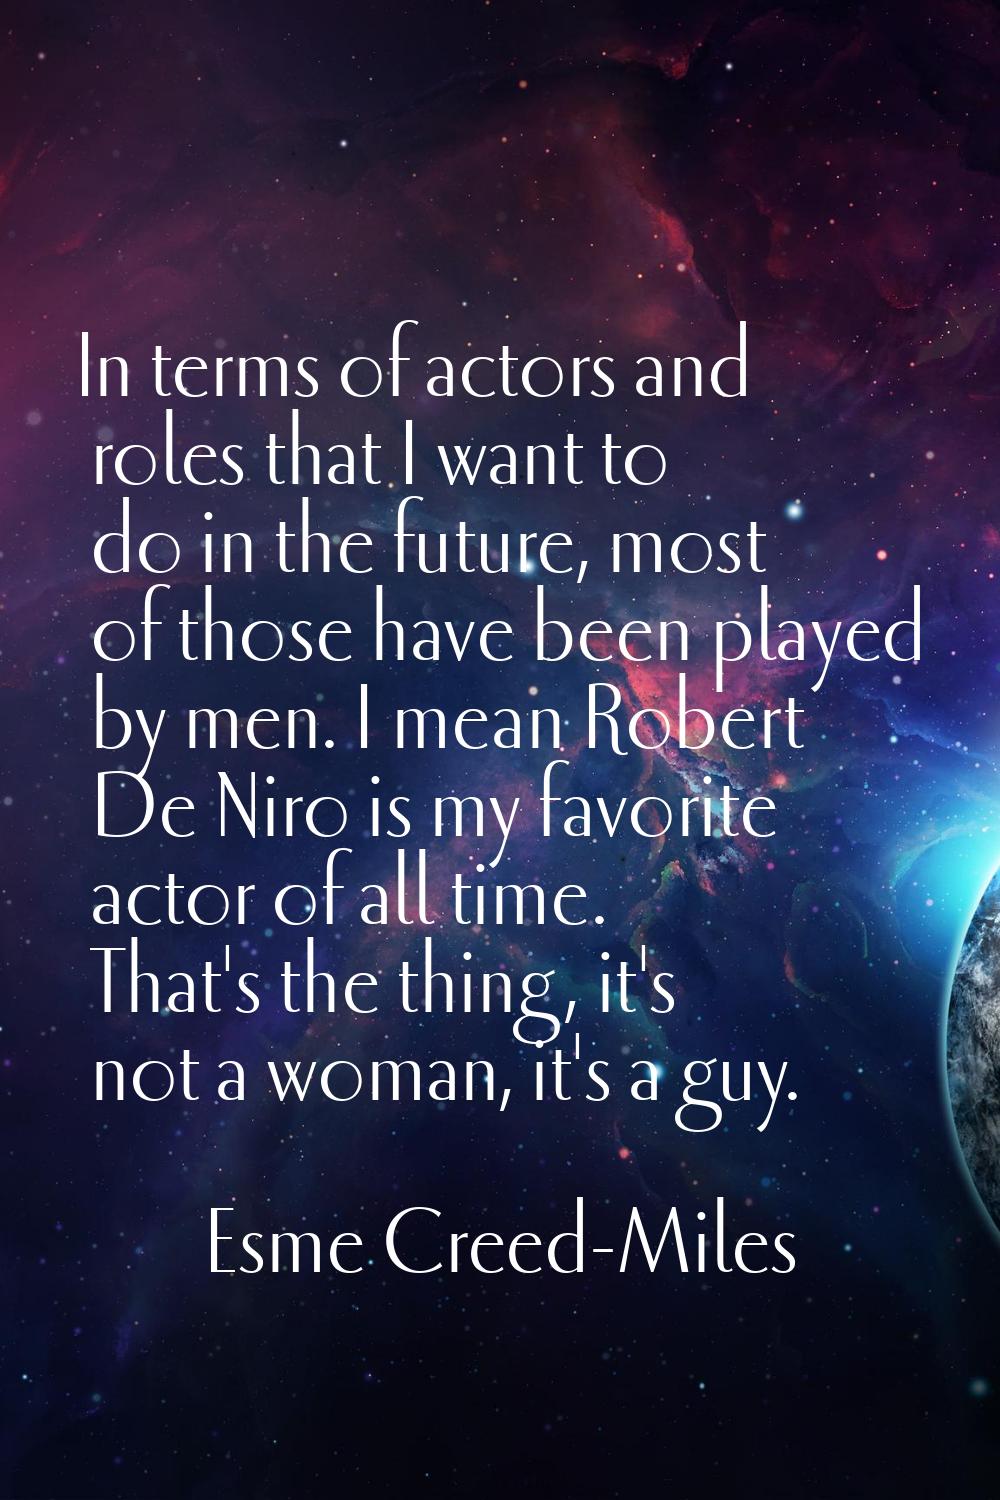 In terms of actors and roles that I want to do in the future, most of those have been played by men